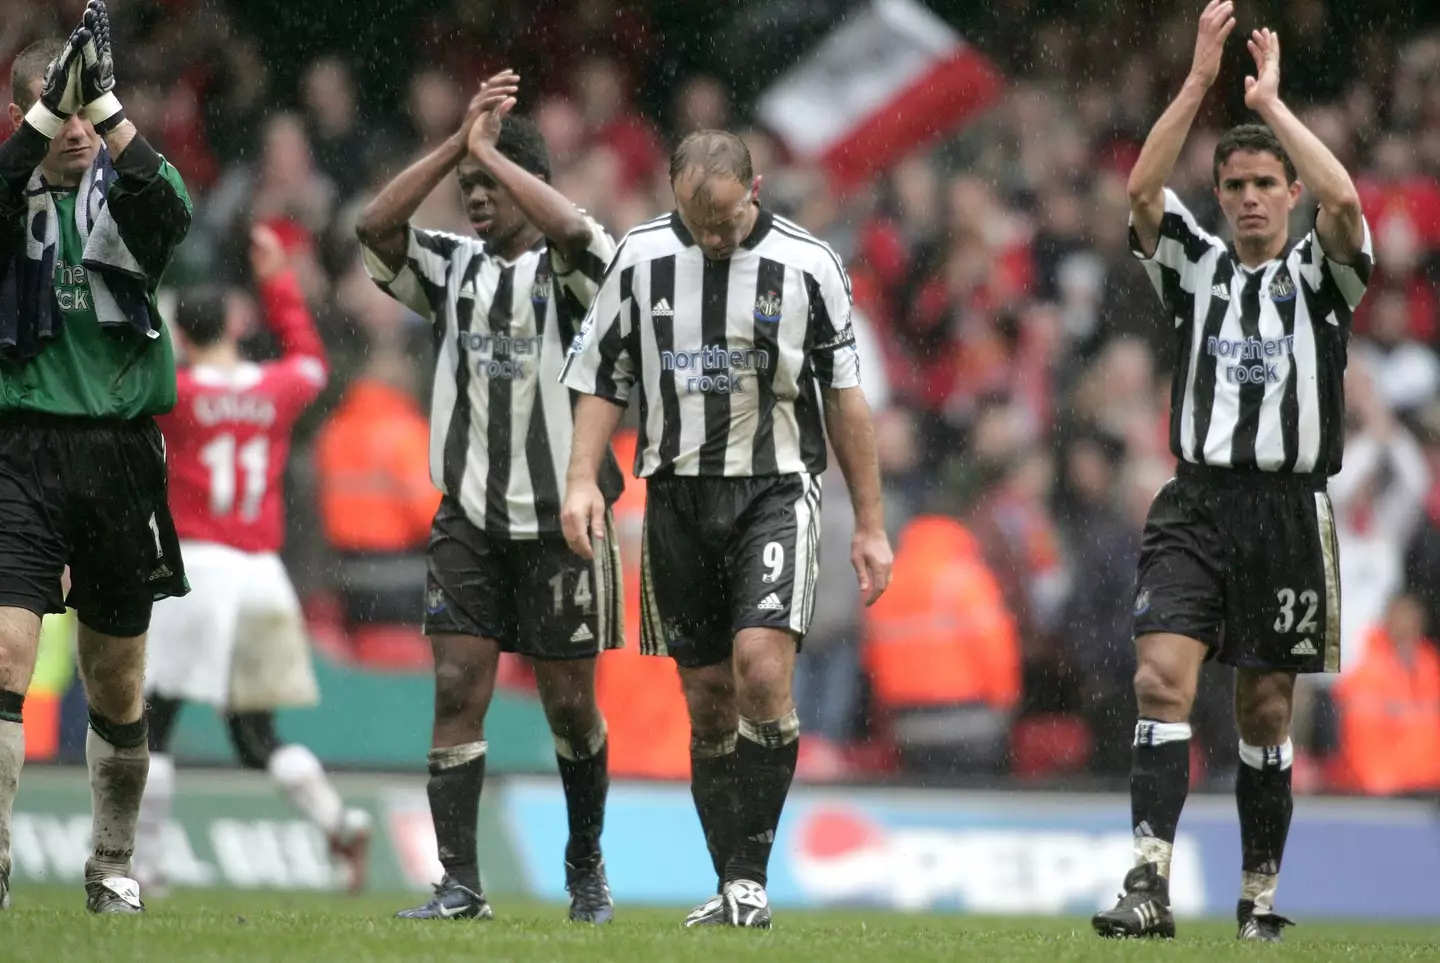 Alan Shearer cuts a dejected figure after losing to Manchester United. Image: Getty 